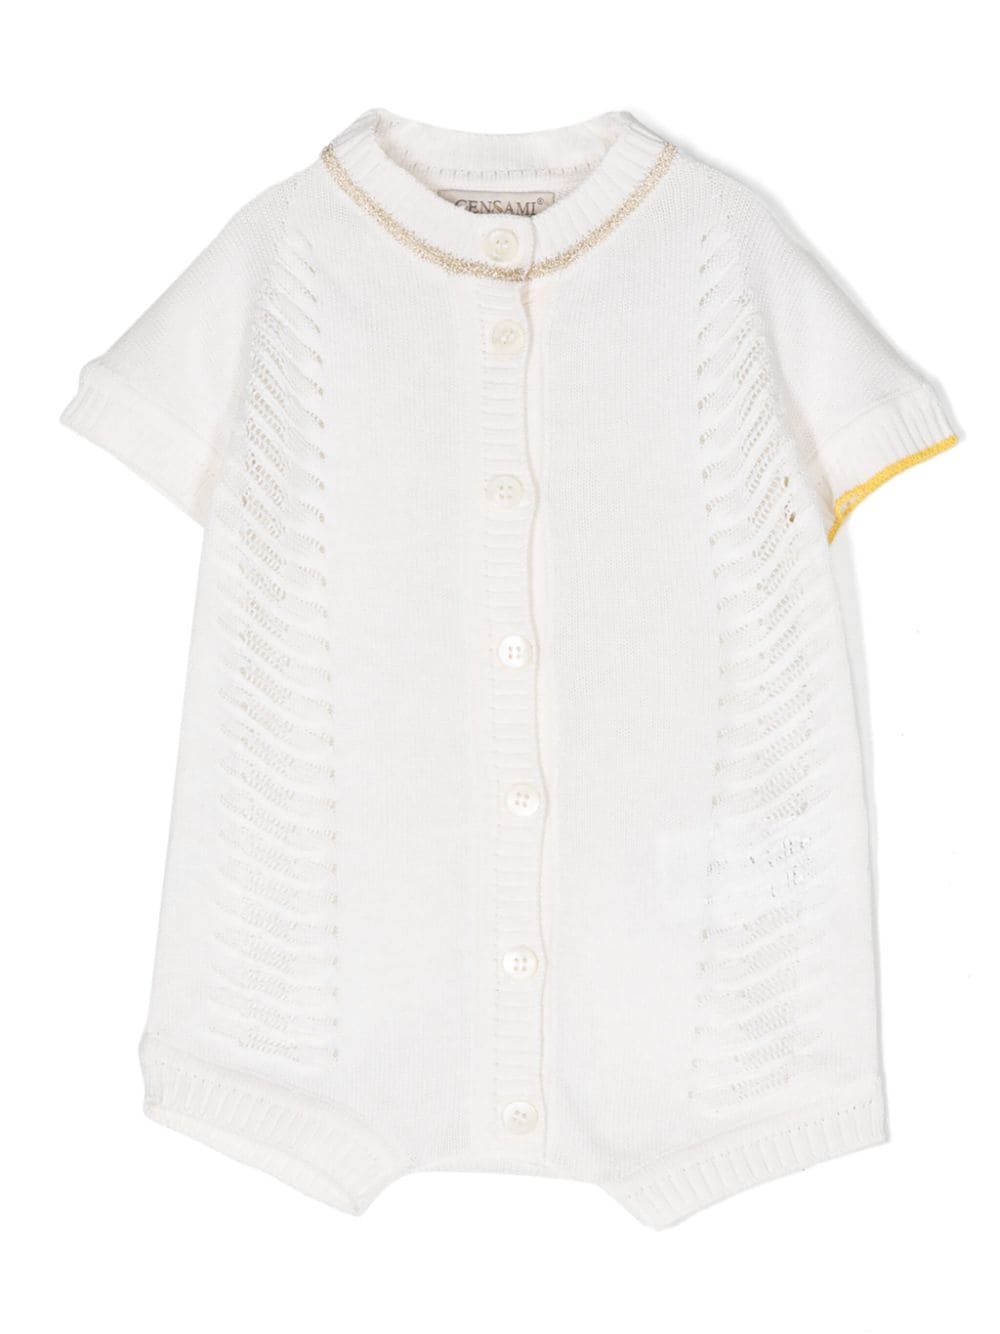 Gensami Babies' Button-up Knitted Rompers In White